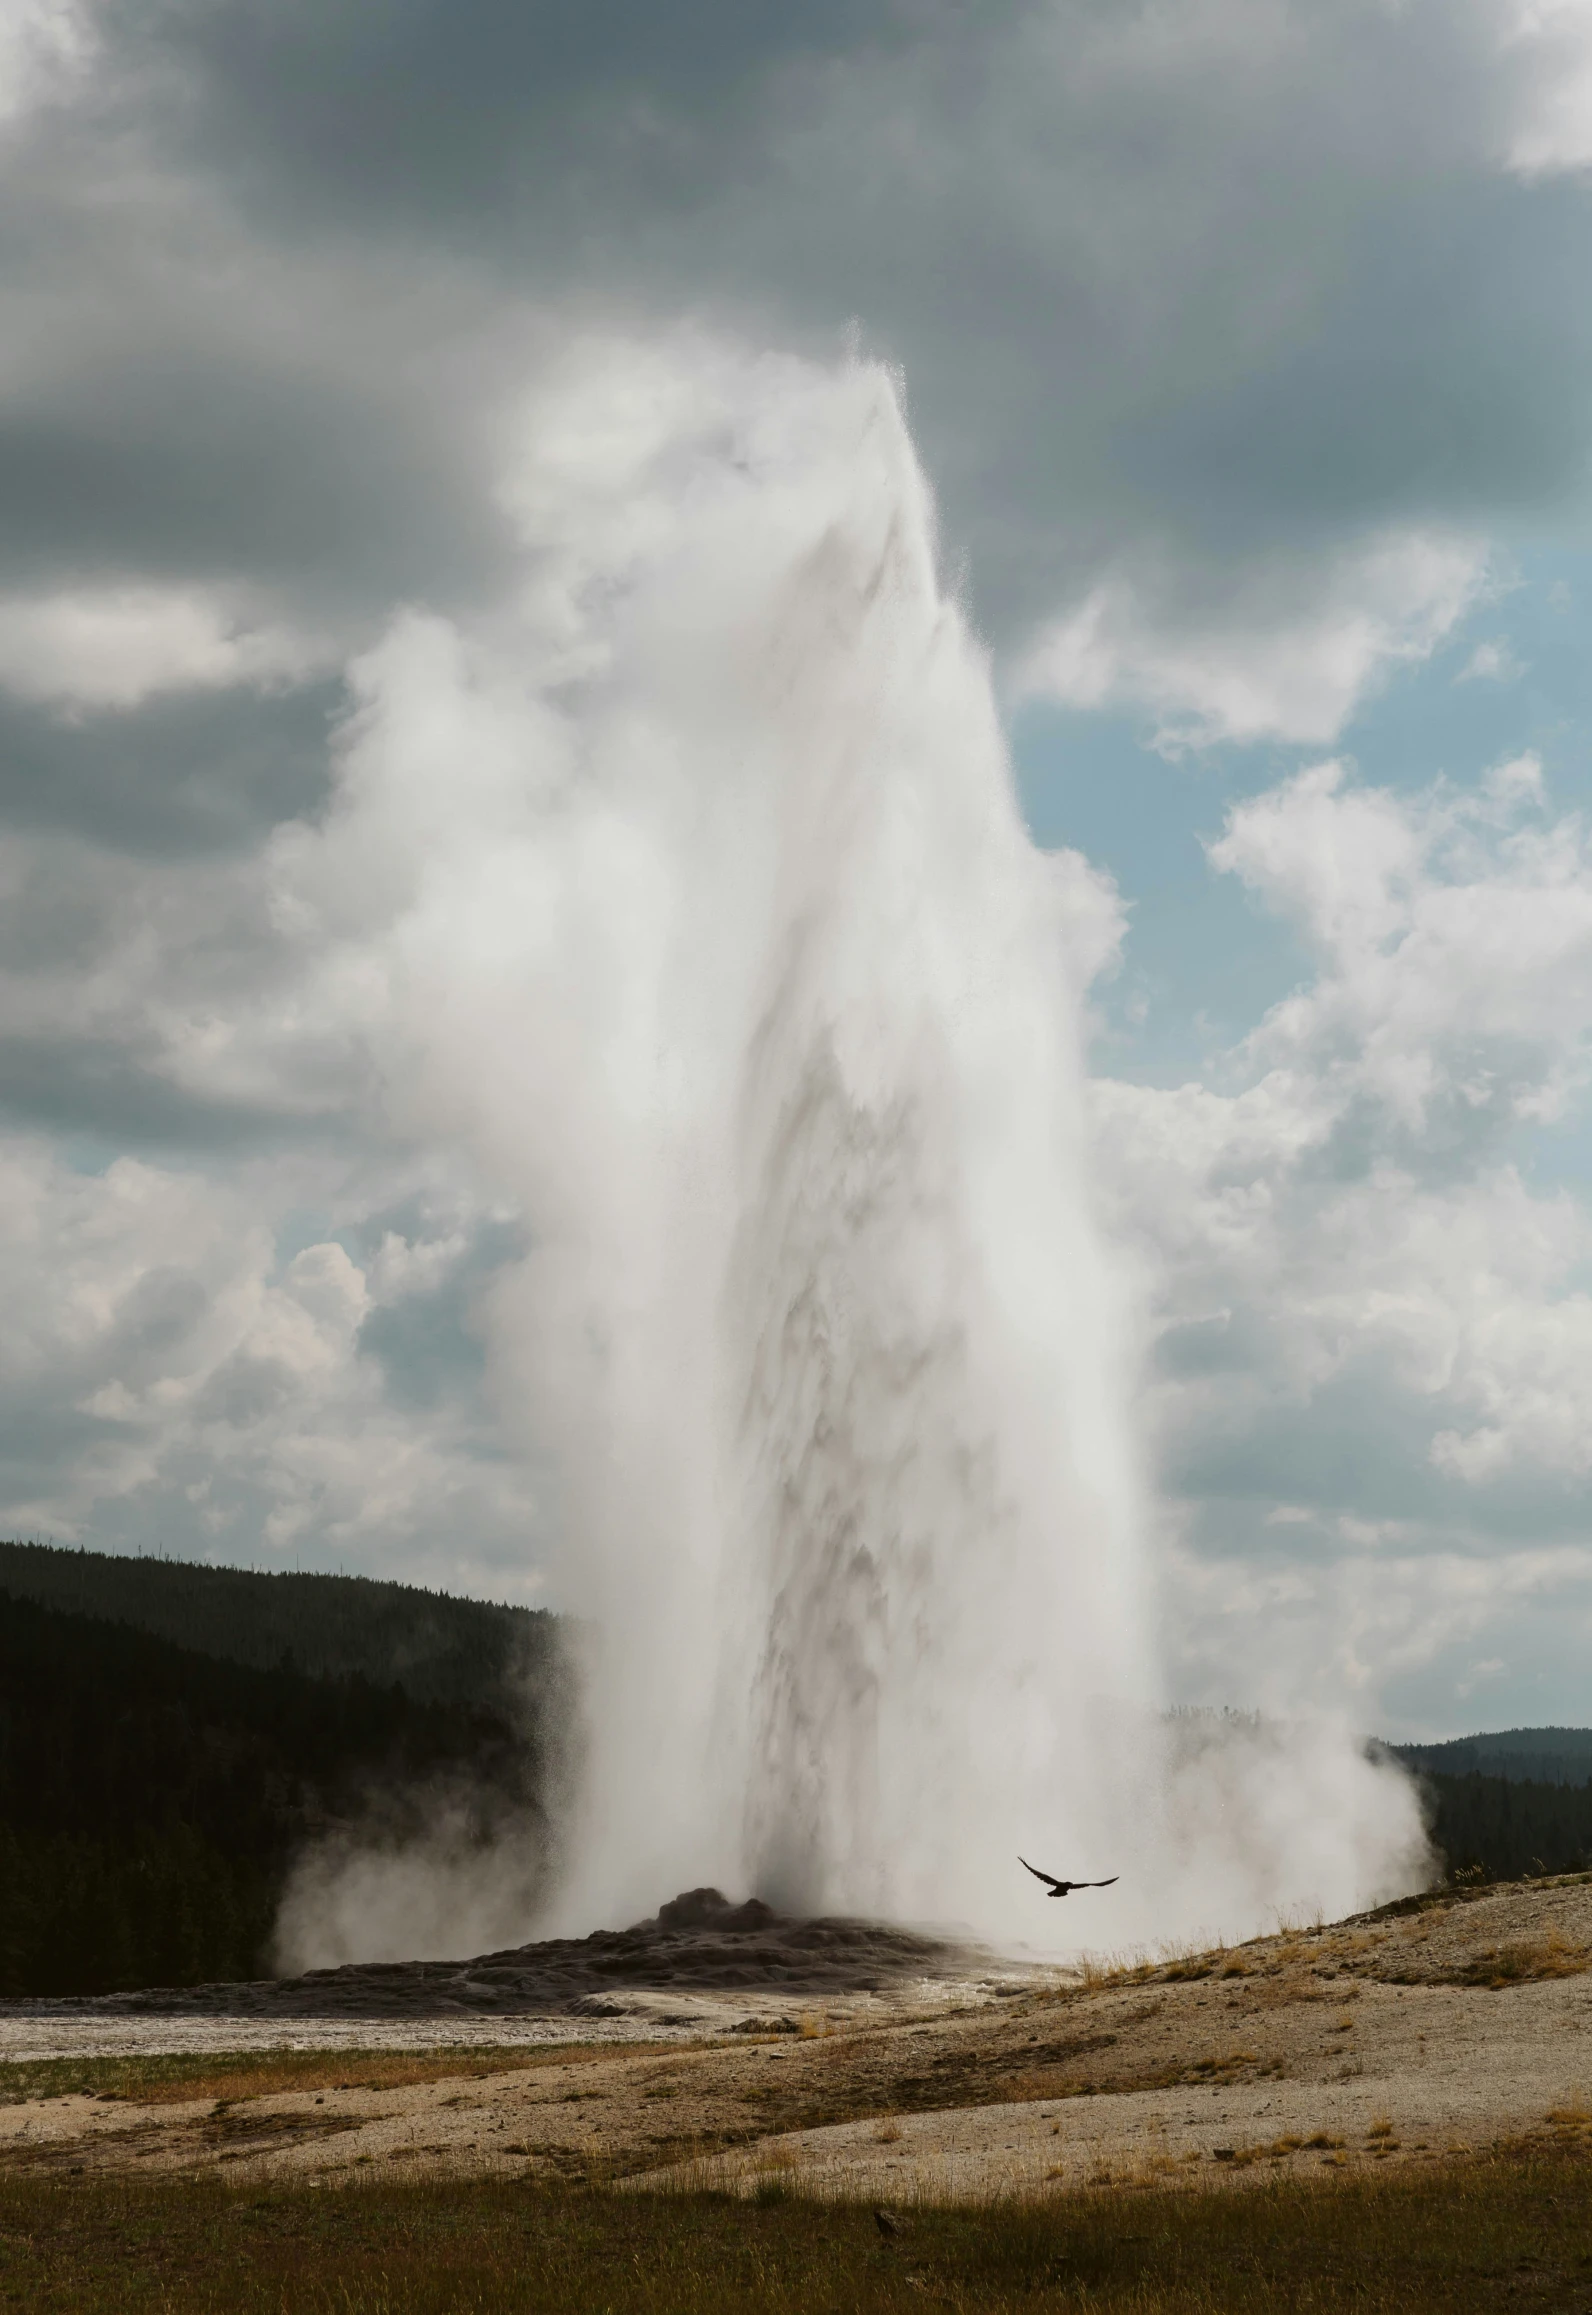 a large geyser erupts water as it rises from a field